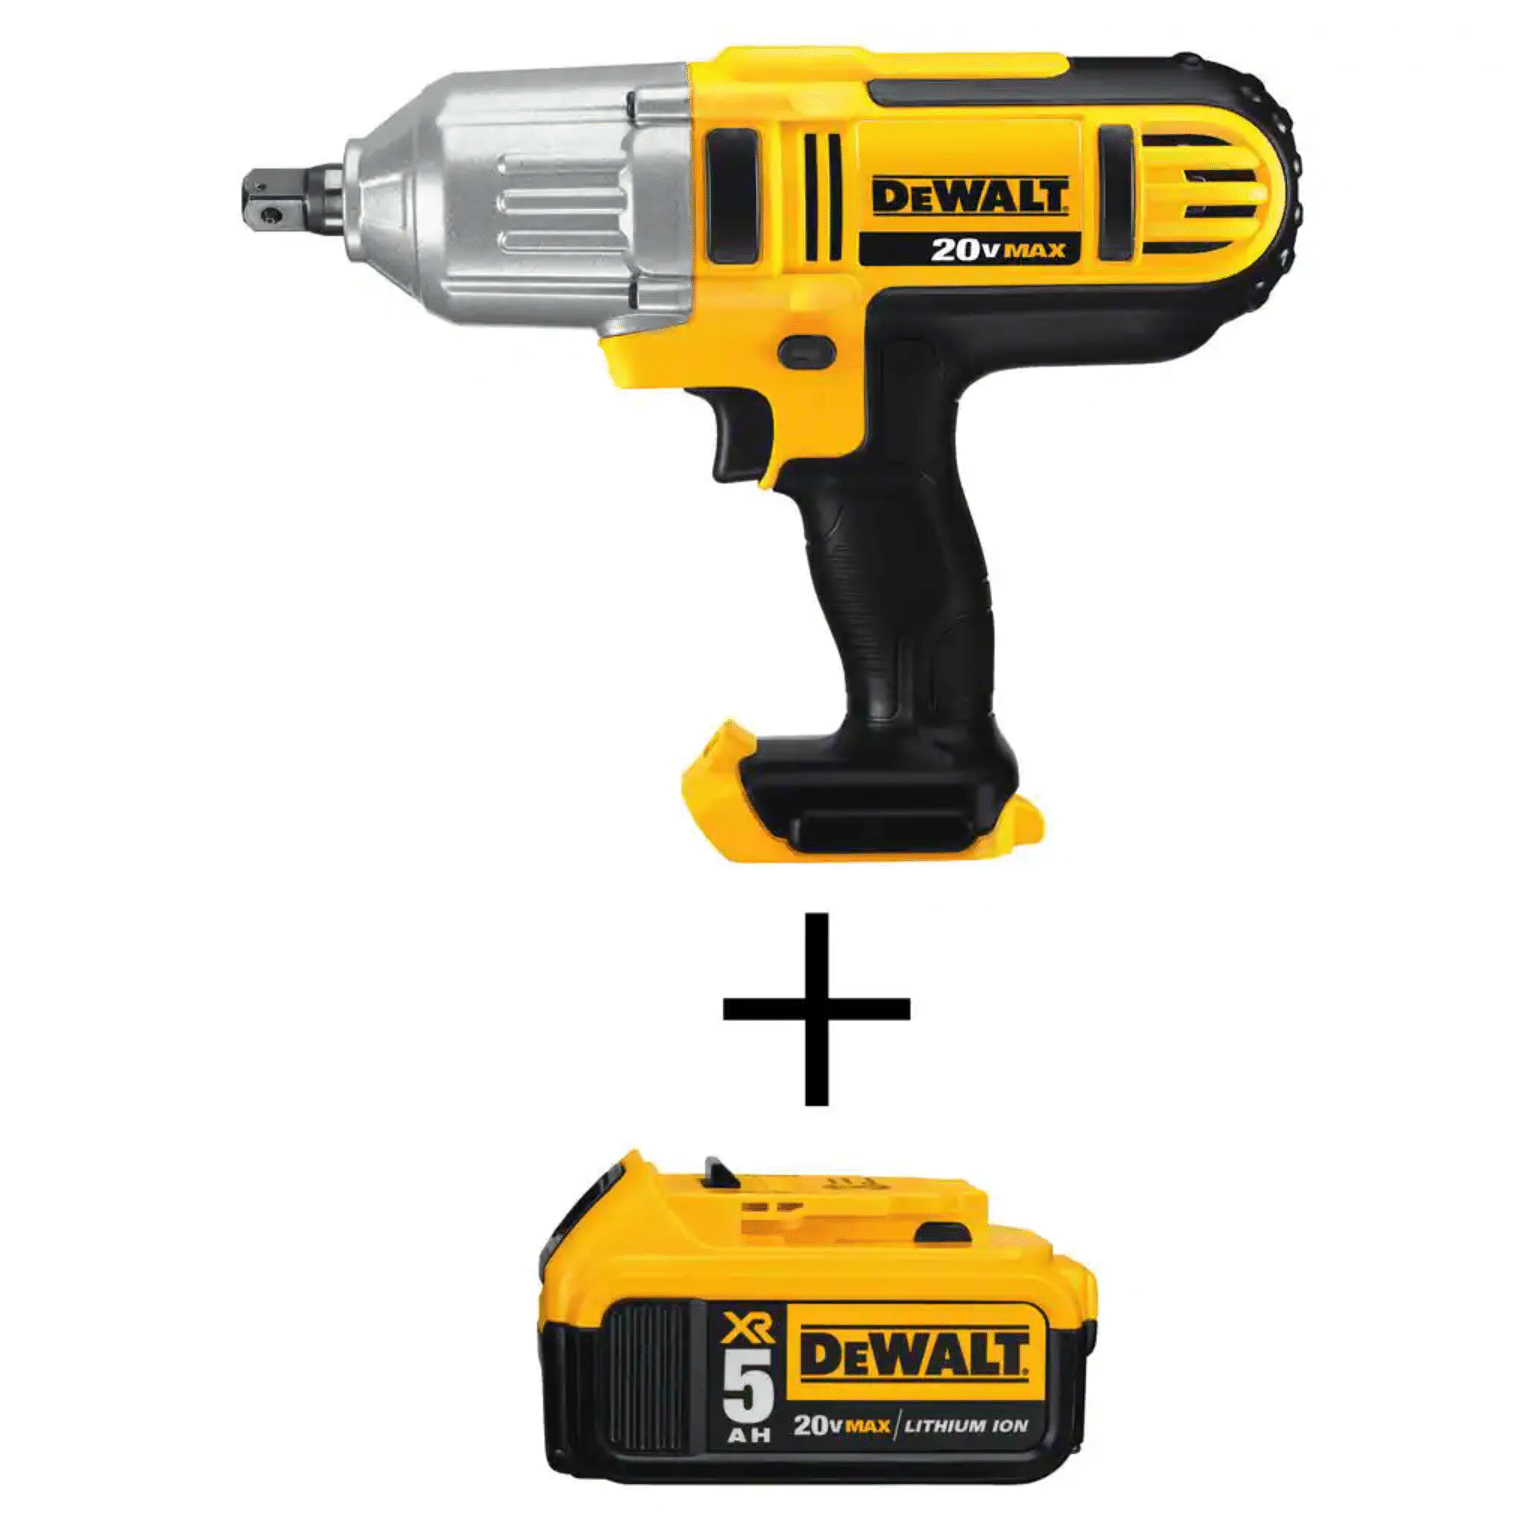 Dewalt 20V Max Cordless 1/2 in. High Torque Impact Wrench with Detent Pin & a 20-Volt 5.0Ah Battery (DCF889BW205)